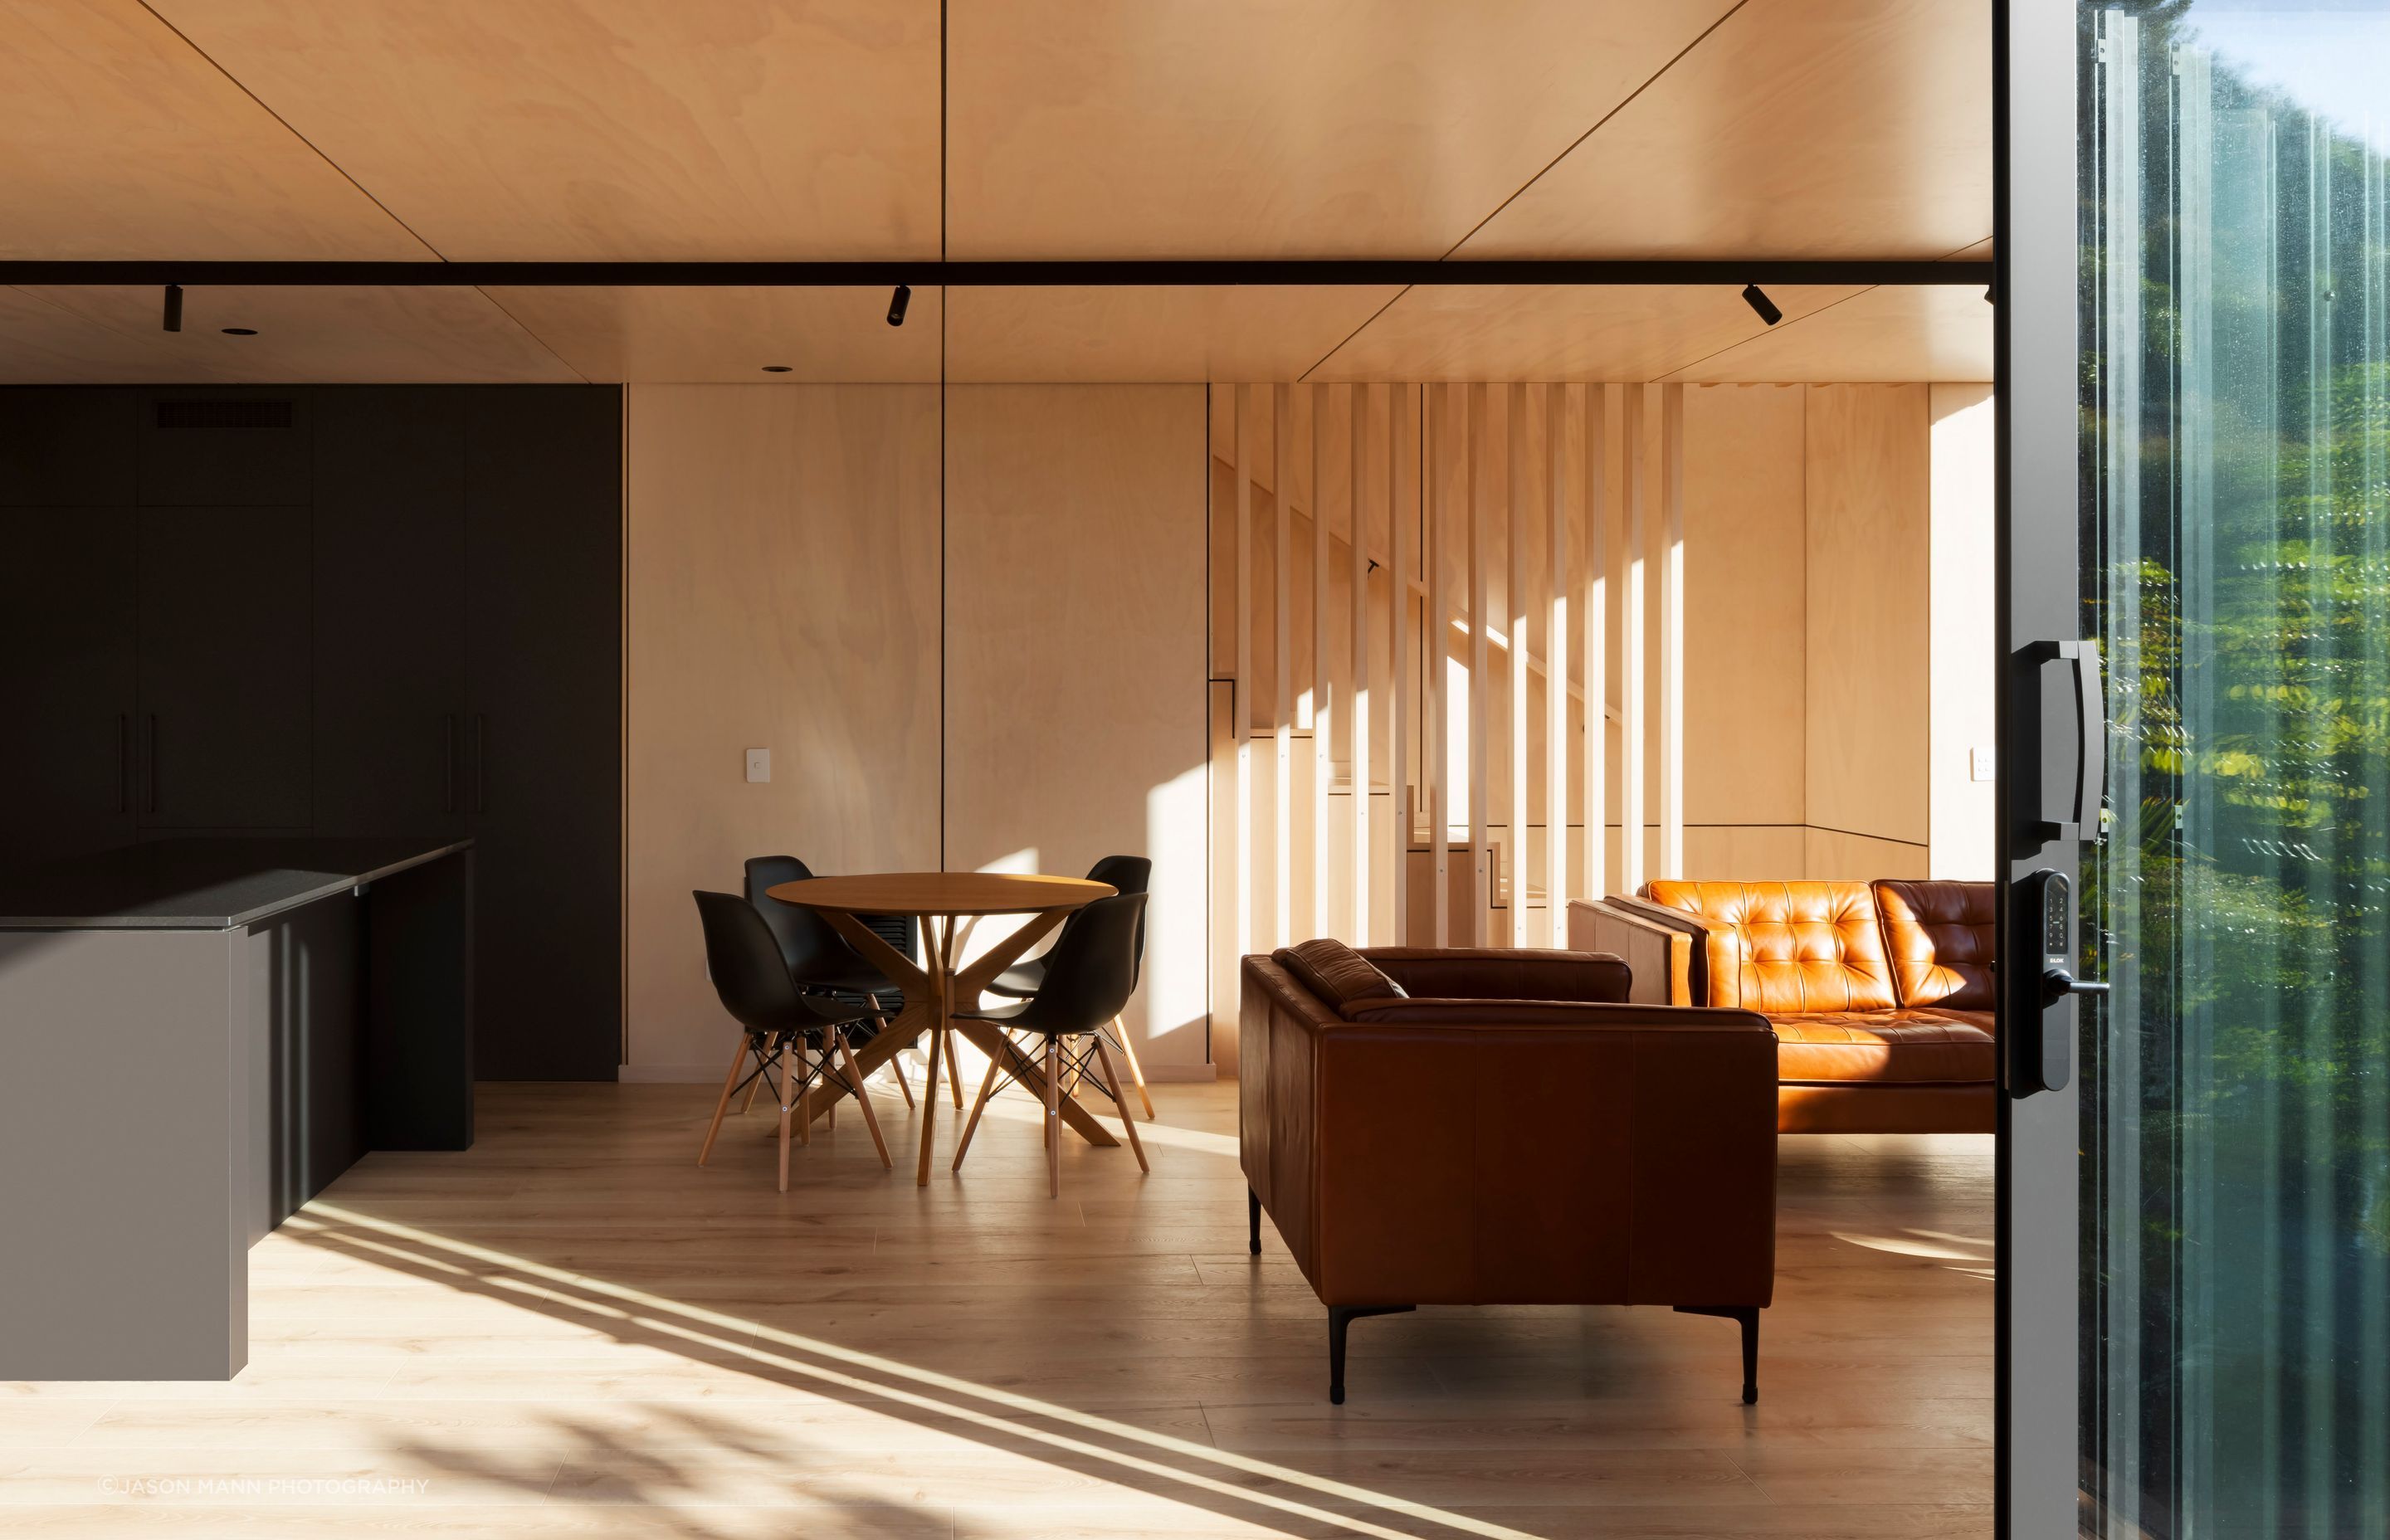 A liberal use of natural materials such as the LVL and timber-framed structure, timber interior finishes and FSC timber decking, along with high thermal performance glazing and ducted heat pump system, has helped the homeowners achieve a highly sustainabl